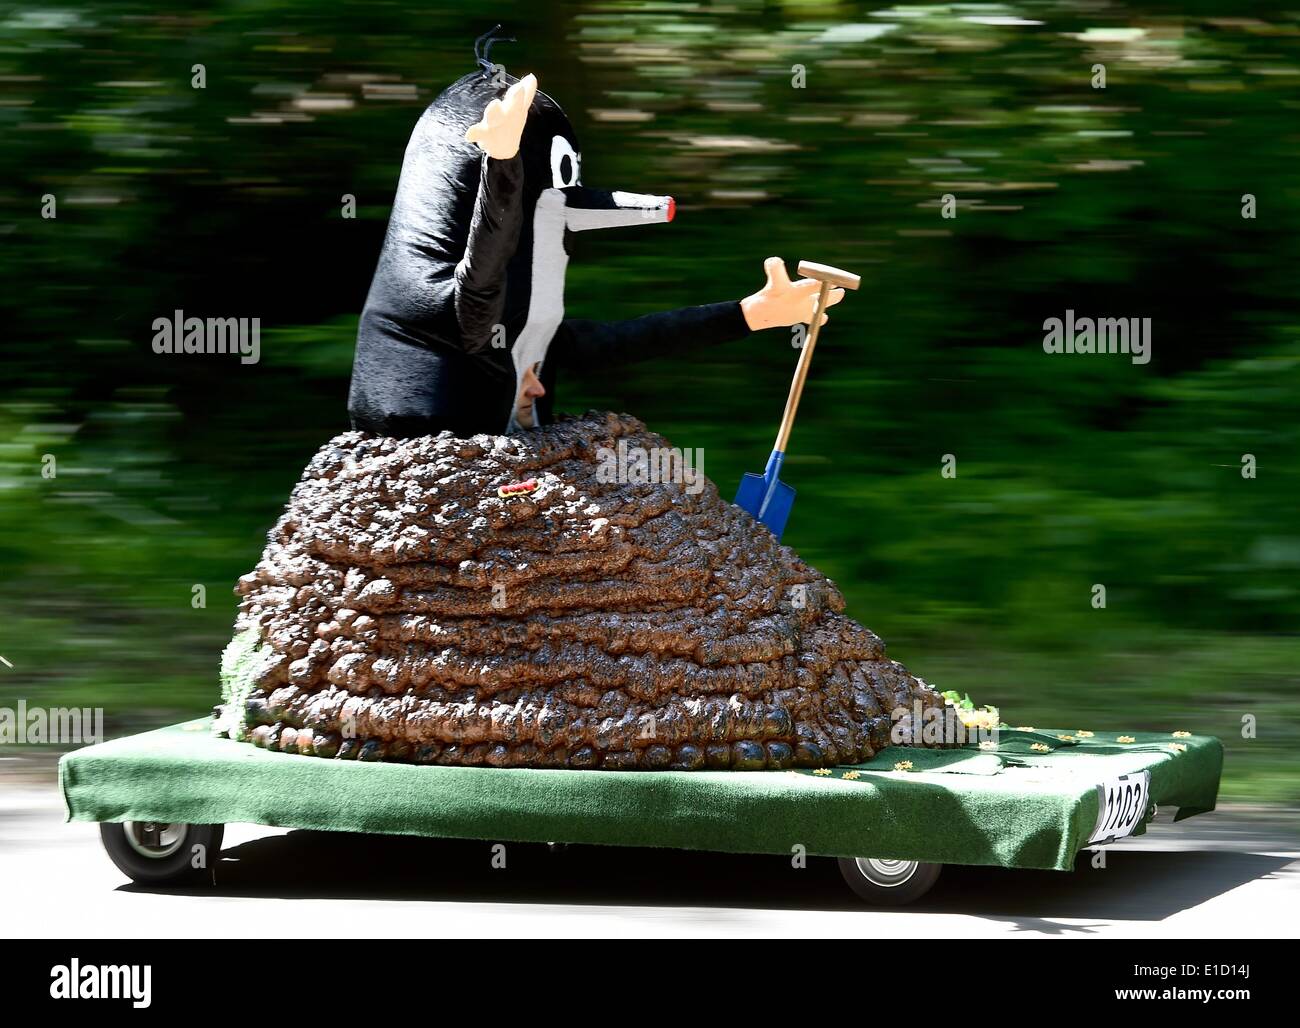 Rauen, Germany. 31st May, 2014. A participant dressed as mole races in his soapbox during the soapbox car race in Rauen, Germany, 31 May 2014. More than fifty participants take part in the gravity racer race. Photo: Patrick Pleul/dpa/Alamy Live News Stock Photo